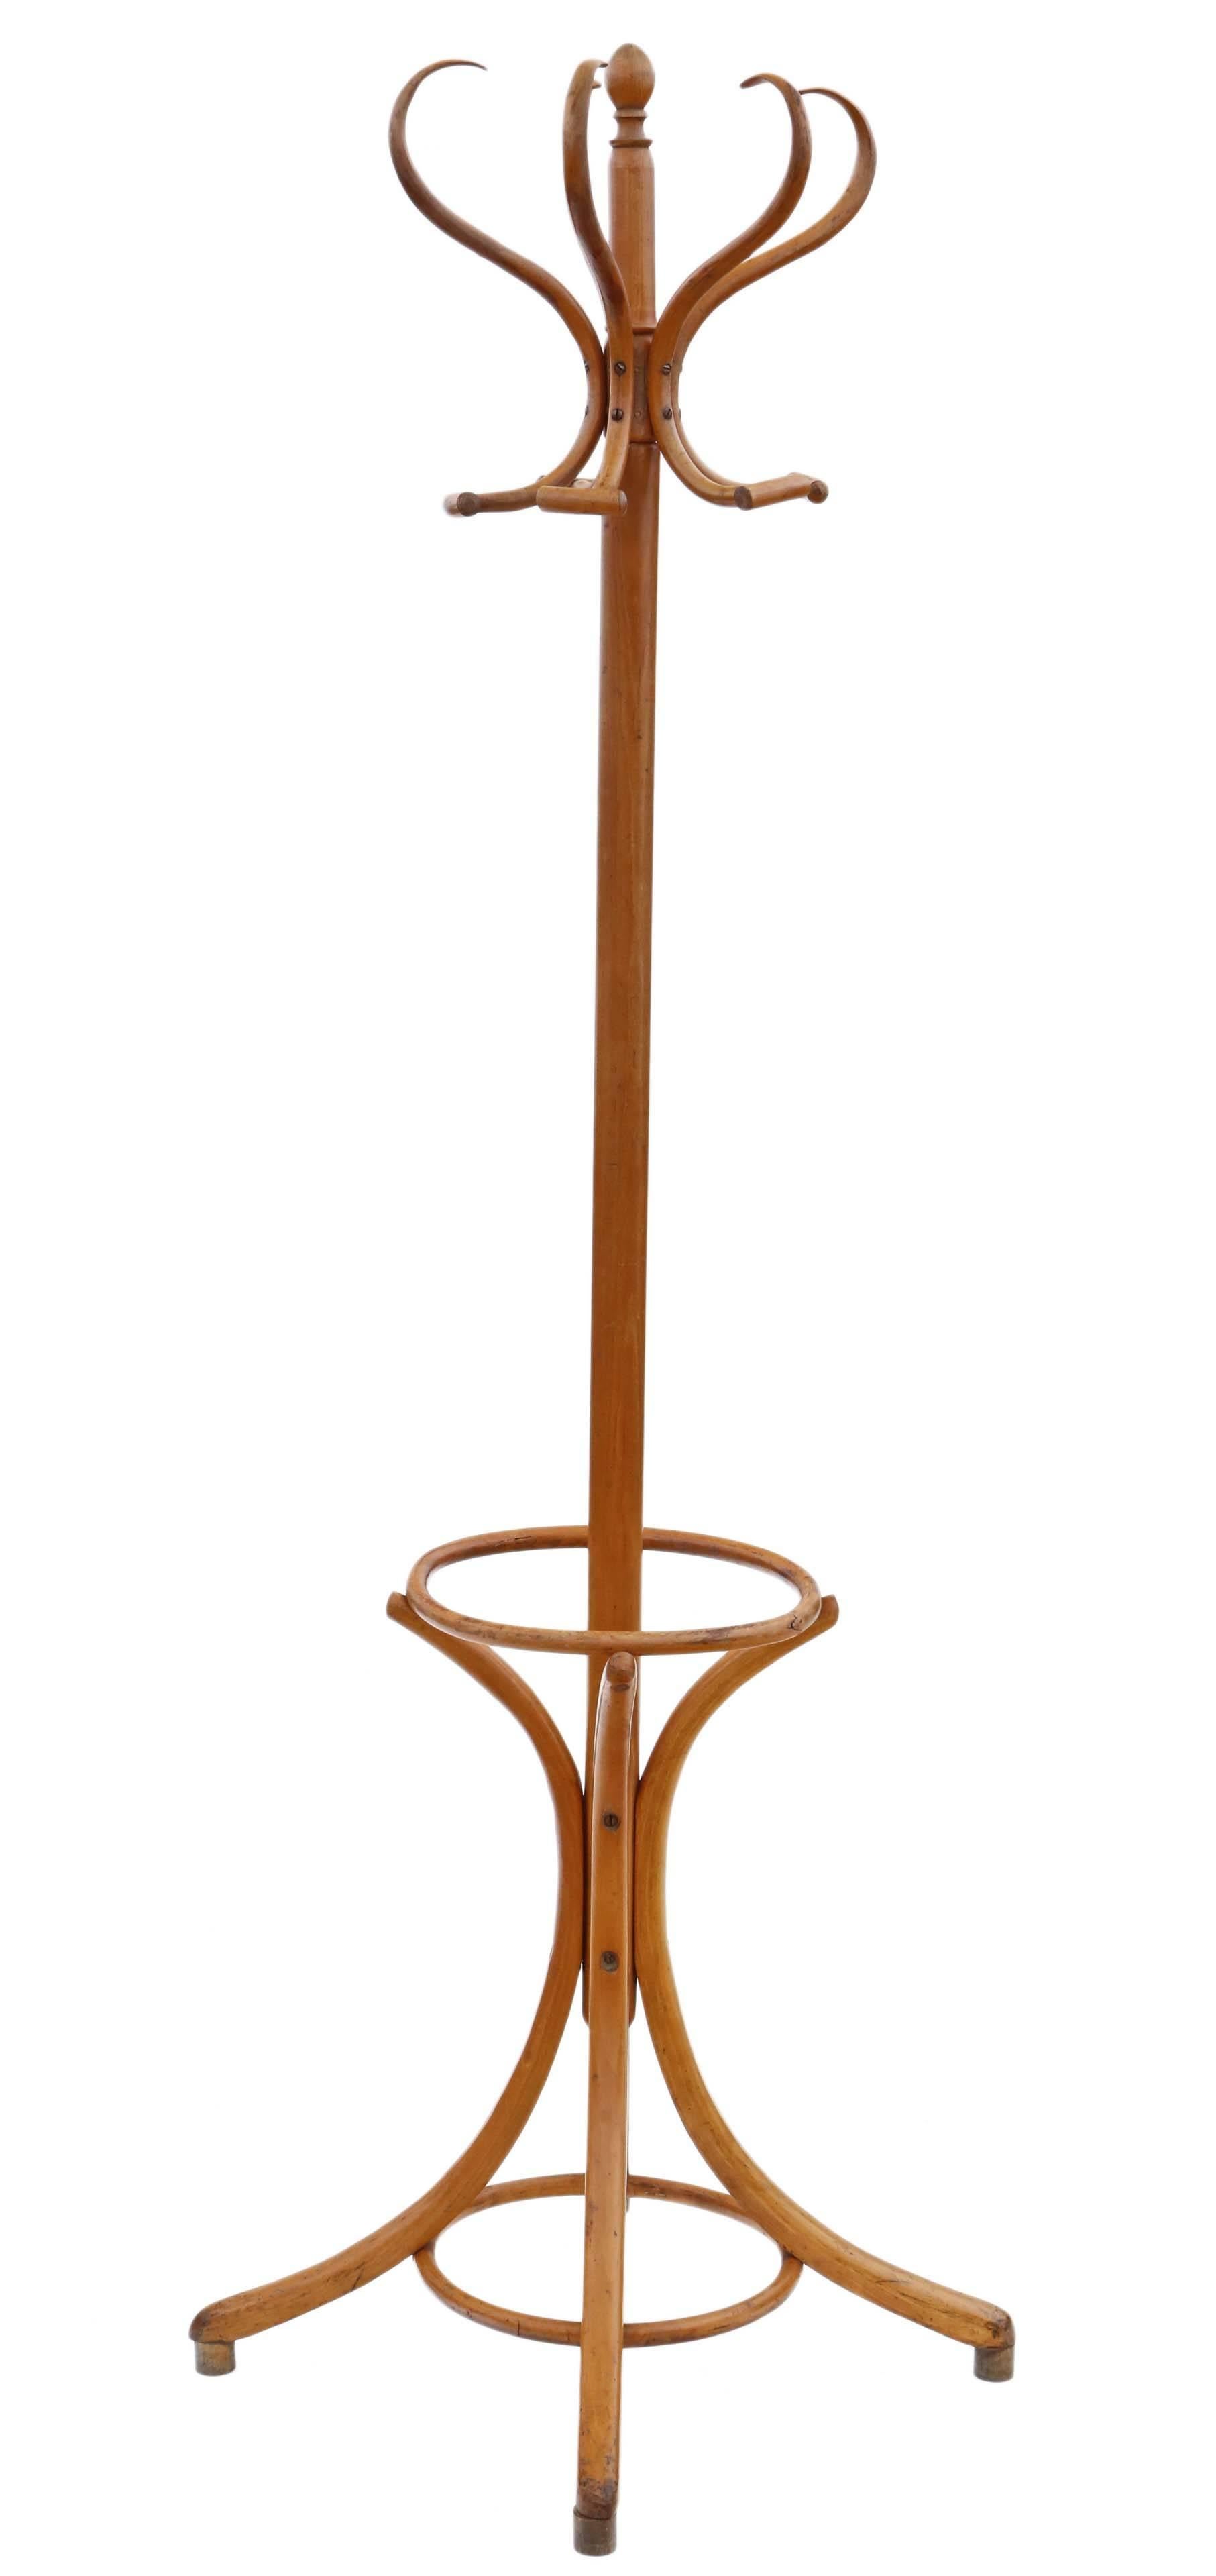 Antique bentwood hall, coat, hat, stick, umbrella stand. Five rotating combined coat and hat hooks.

Around 50 years old. Lovely age and charm.

Solid and strong with no loose joints. Some historical cracking, as is usual for this type of piece,